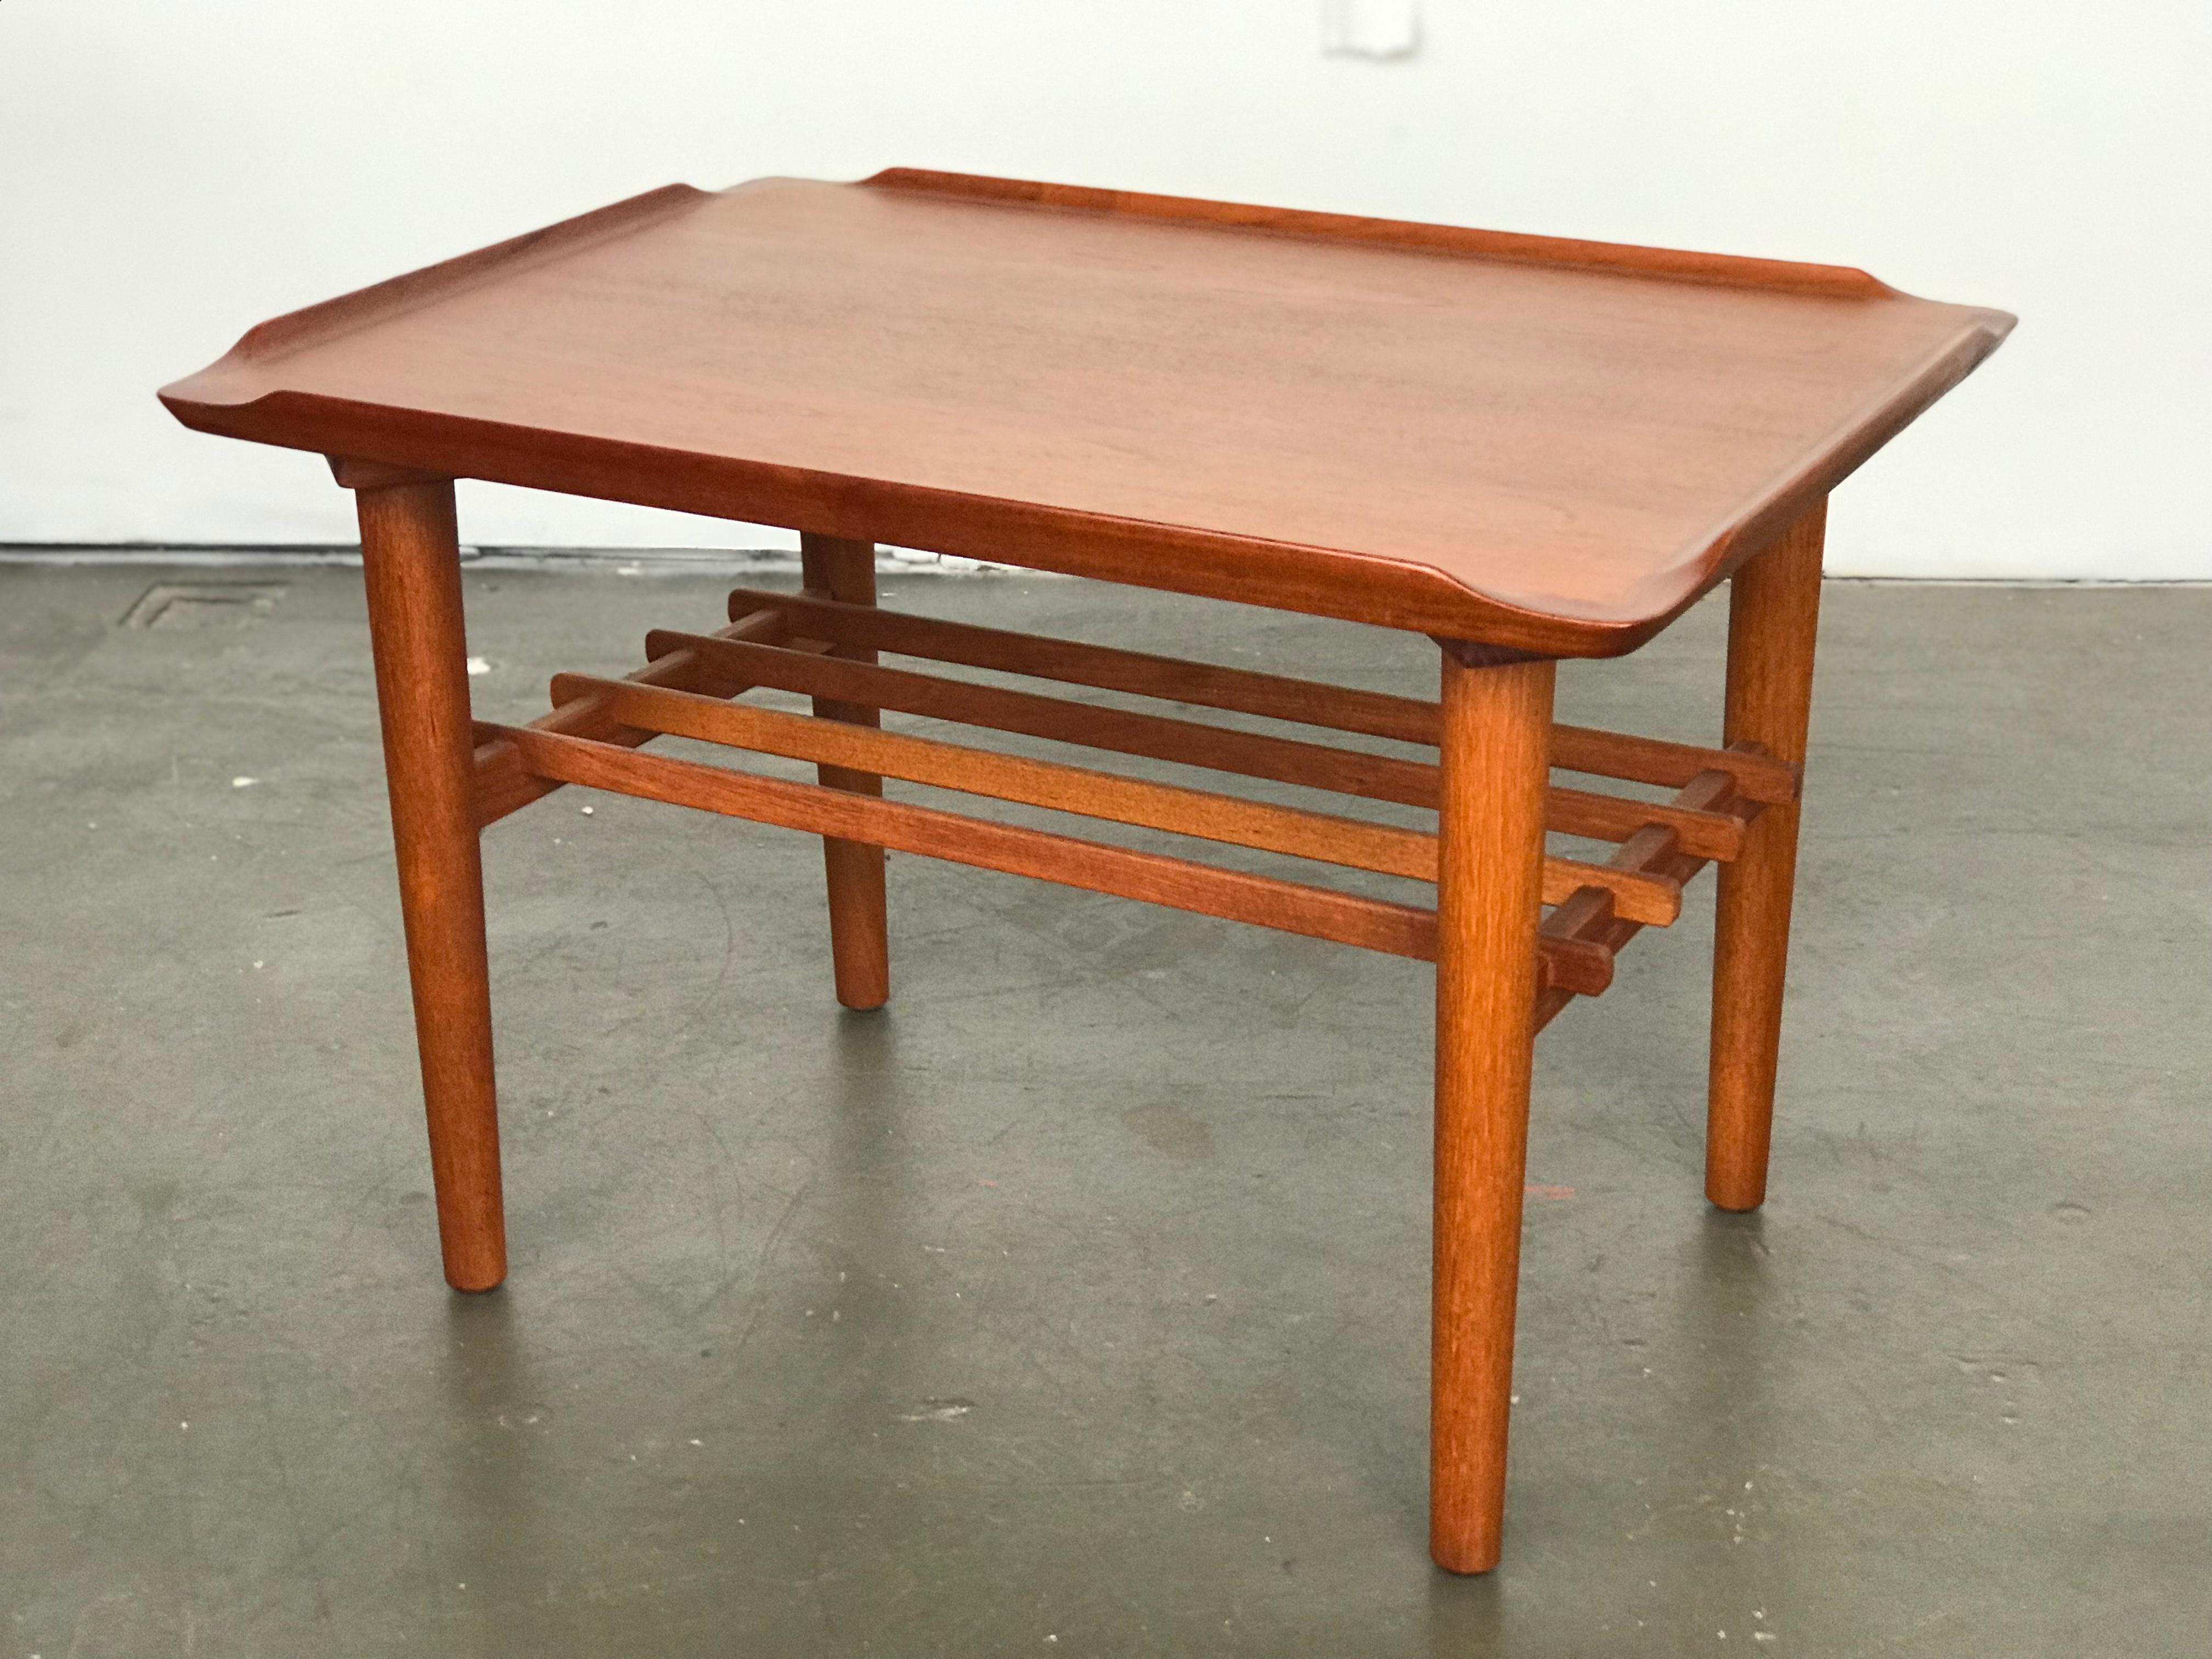 Excellent teak side or petite coffee table by Georg Jensen for Kubus. Lovely sculpted edges. Magazine rack is detachable. The legs unscrew - this is such a well made piece. 
This can be shipped parcel post since the legs unscrew the and rack is